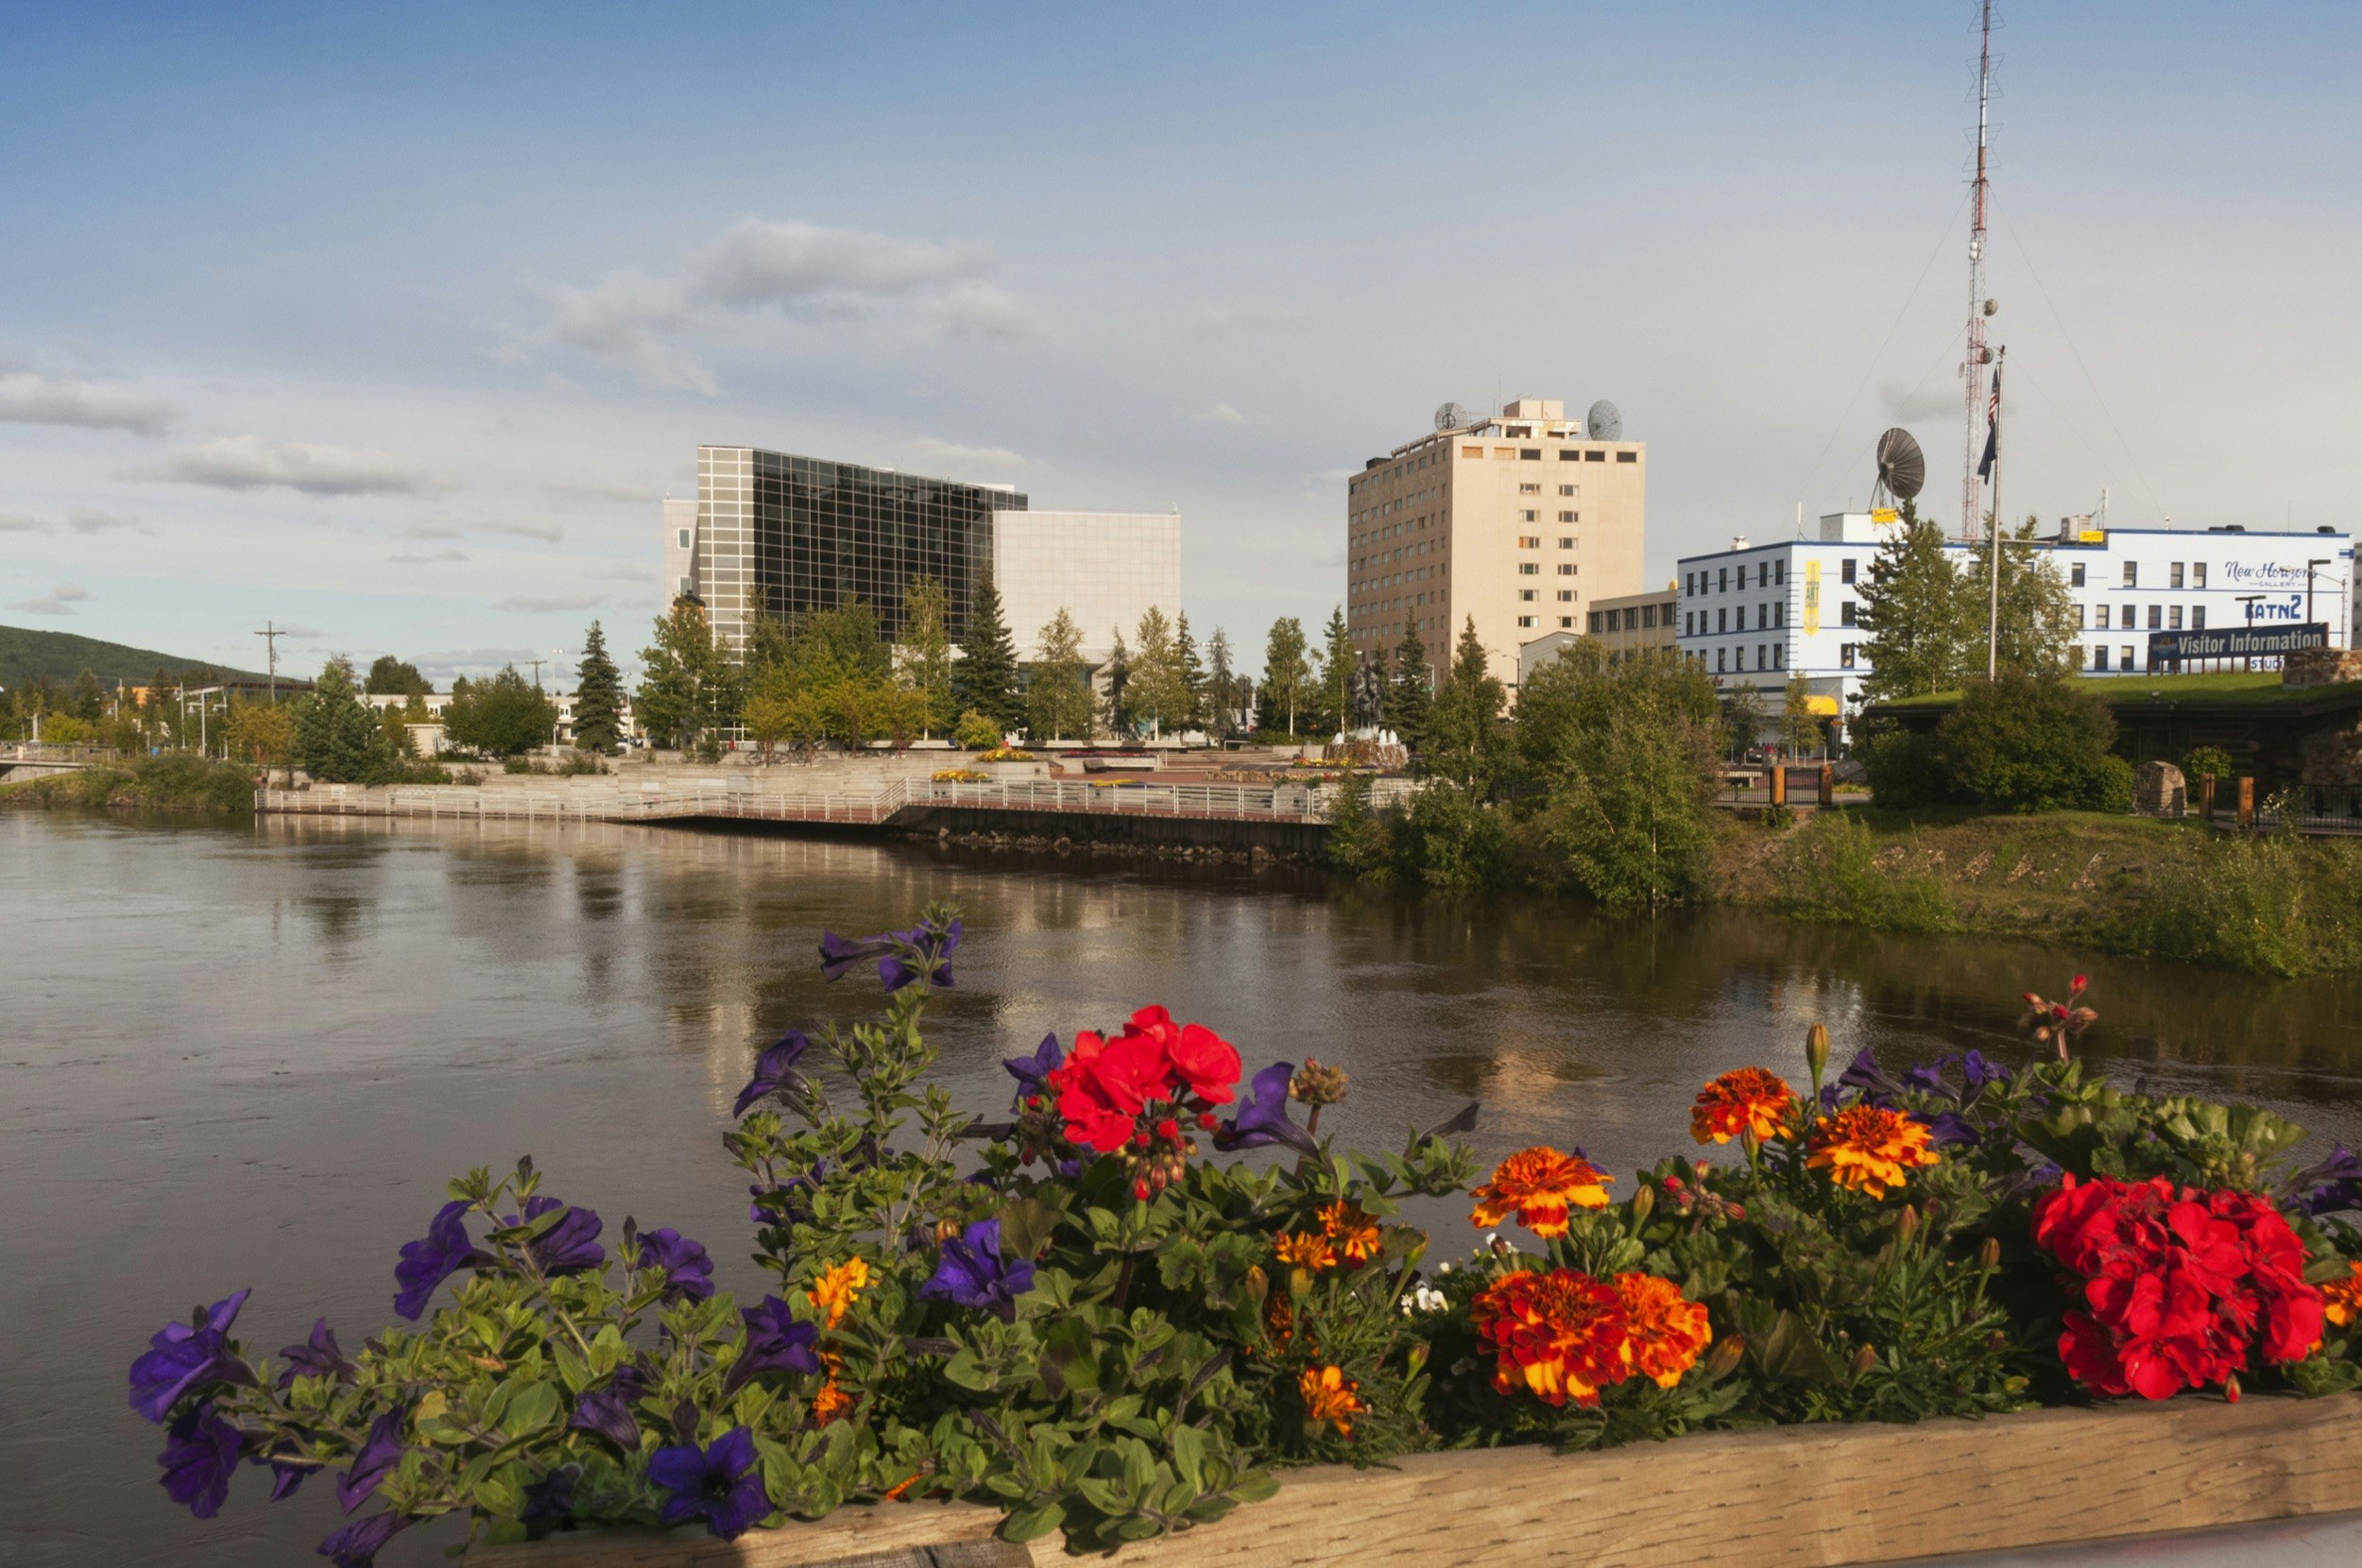 Flowers sit in front of a building and a pond in Fairbanks, Alaska